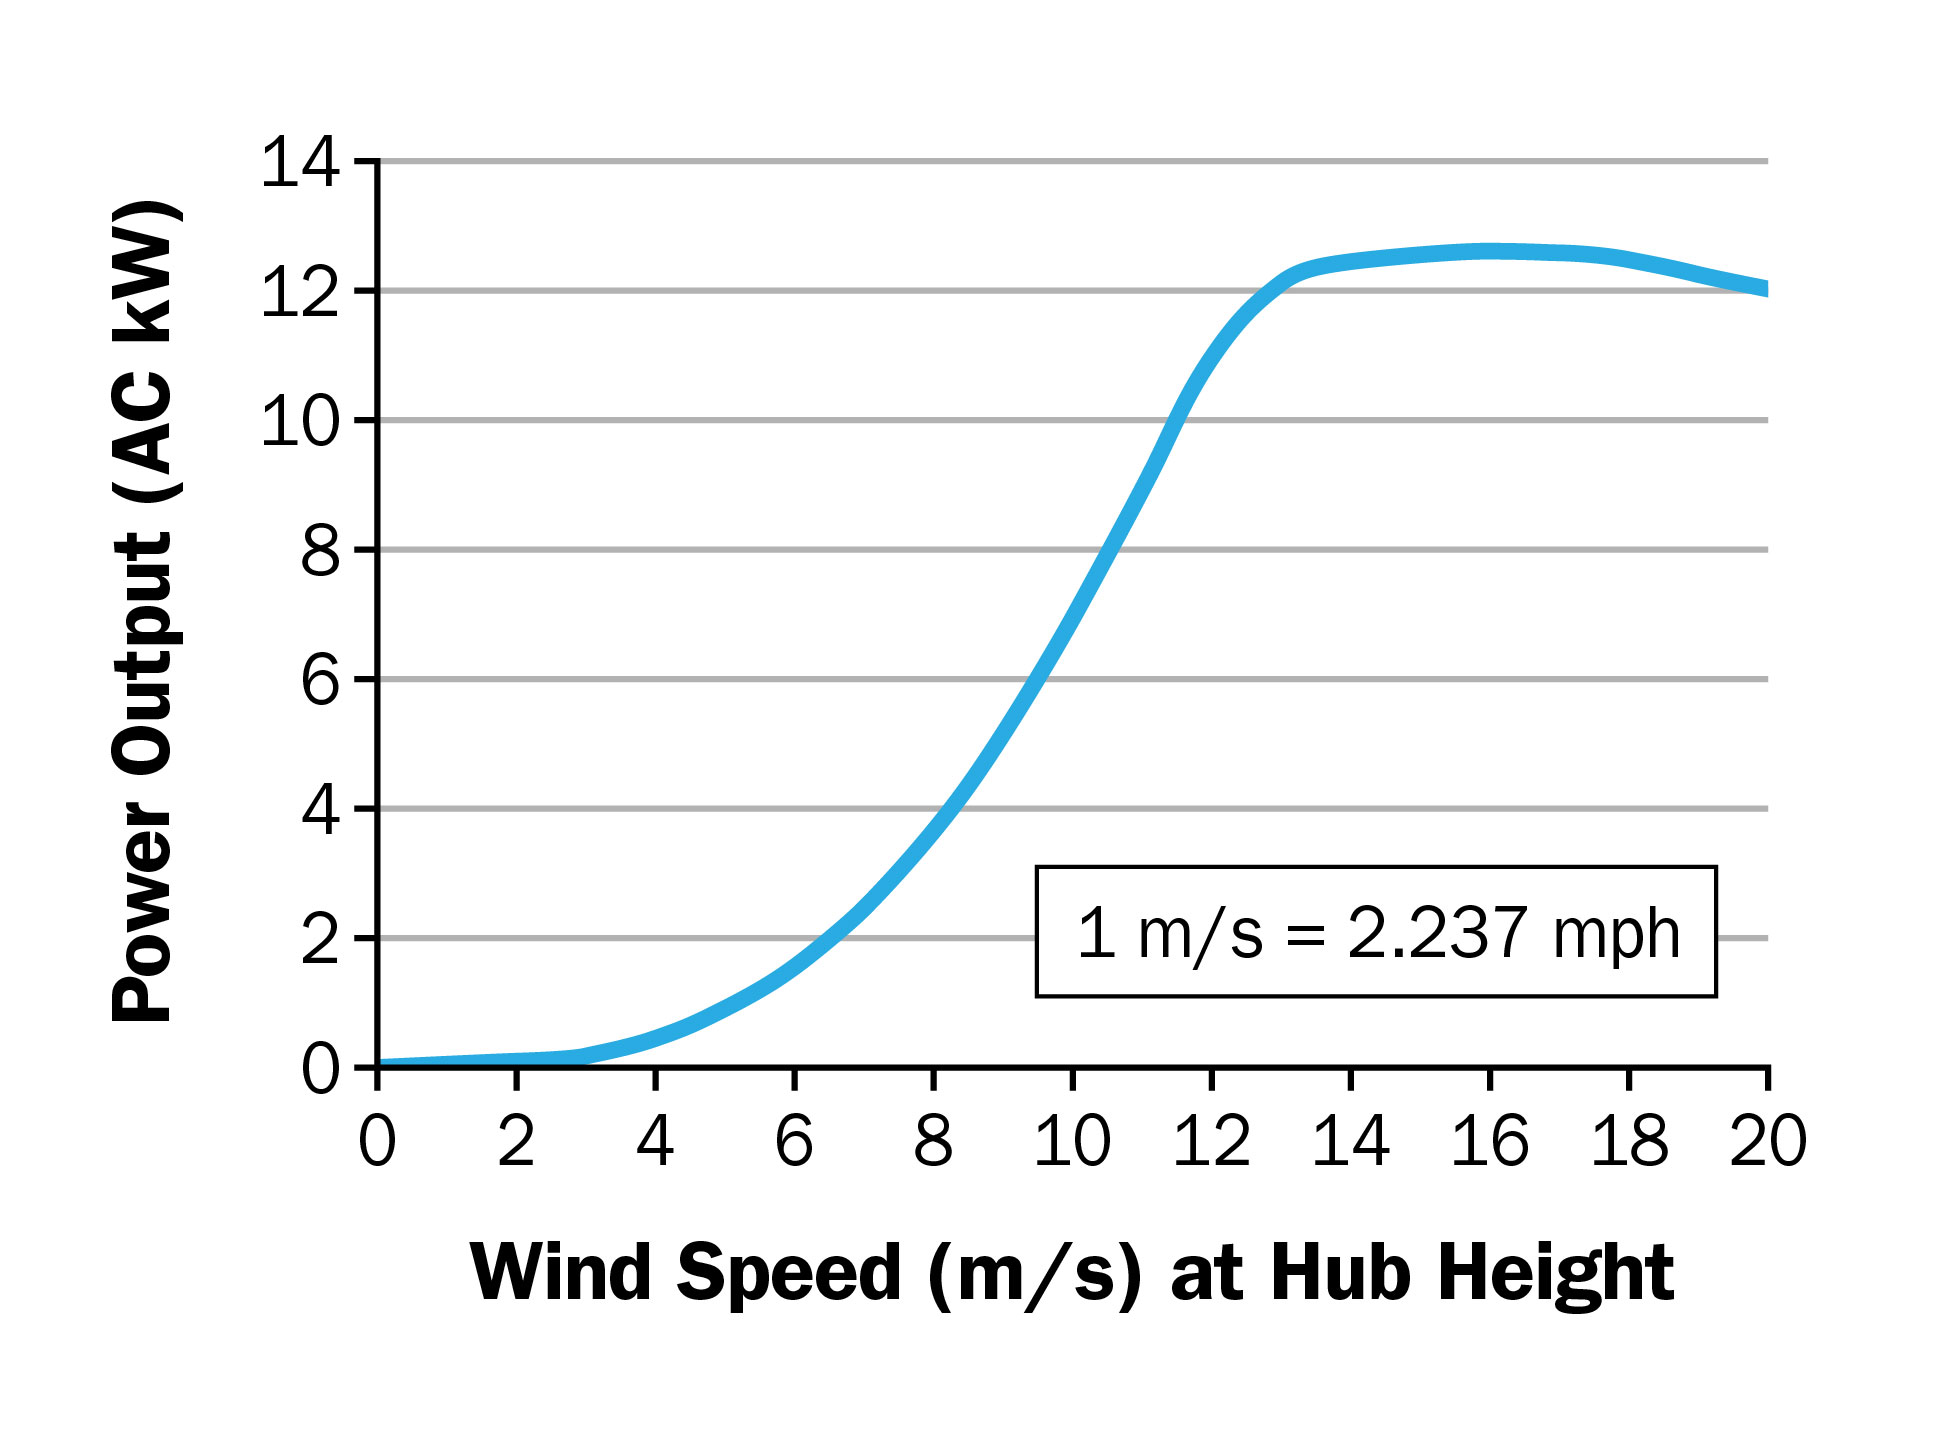 Wind turbine power curve with control regions. No power is generated